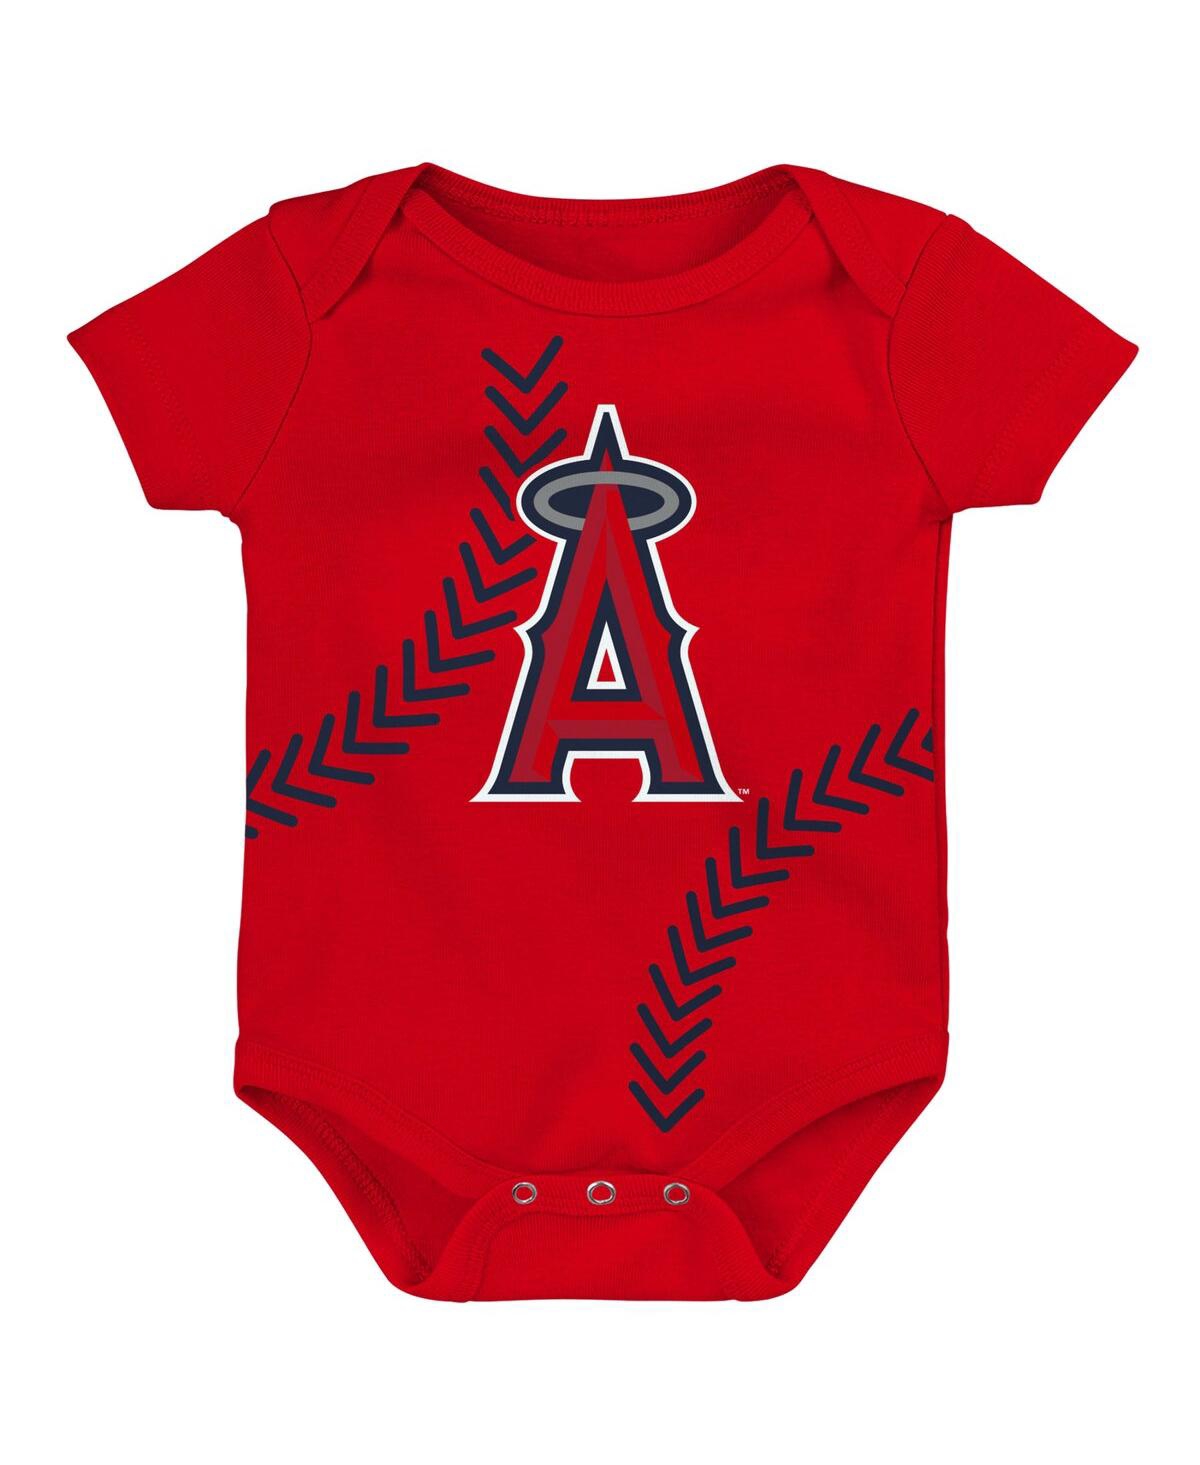 Outerstuff Babies' Newborn And Infant Boys And Girls Red Los Angeles Angels Primary Team Logo Bodysuit